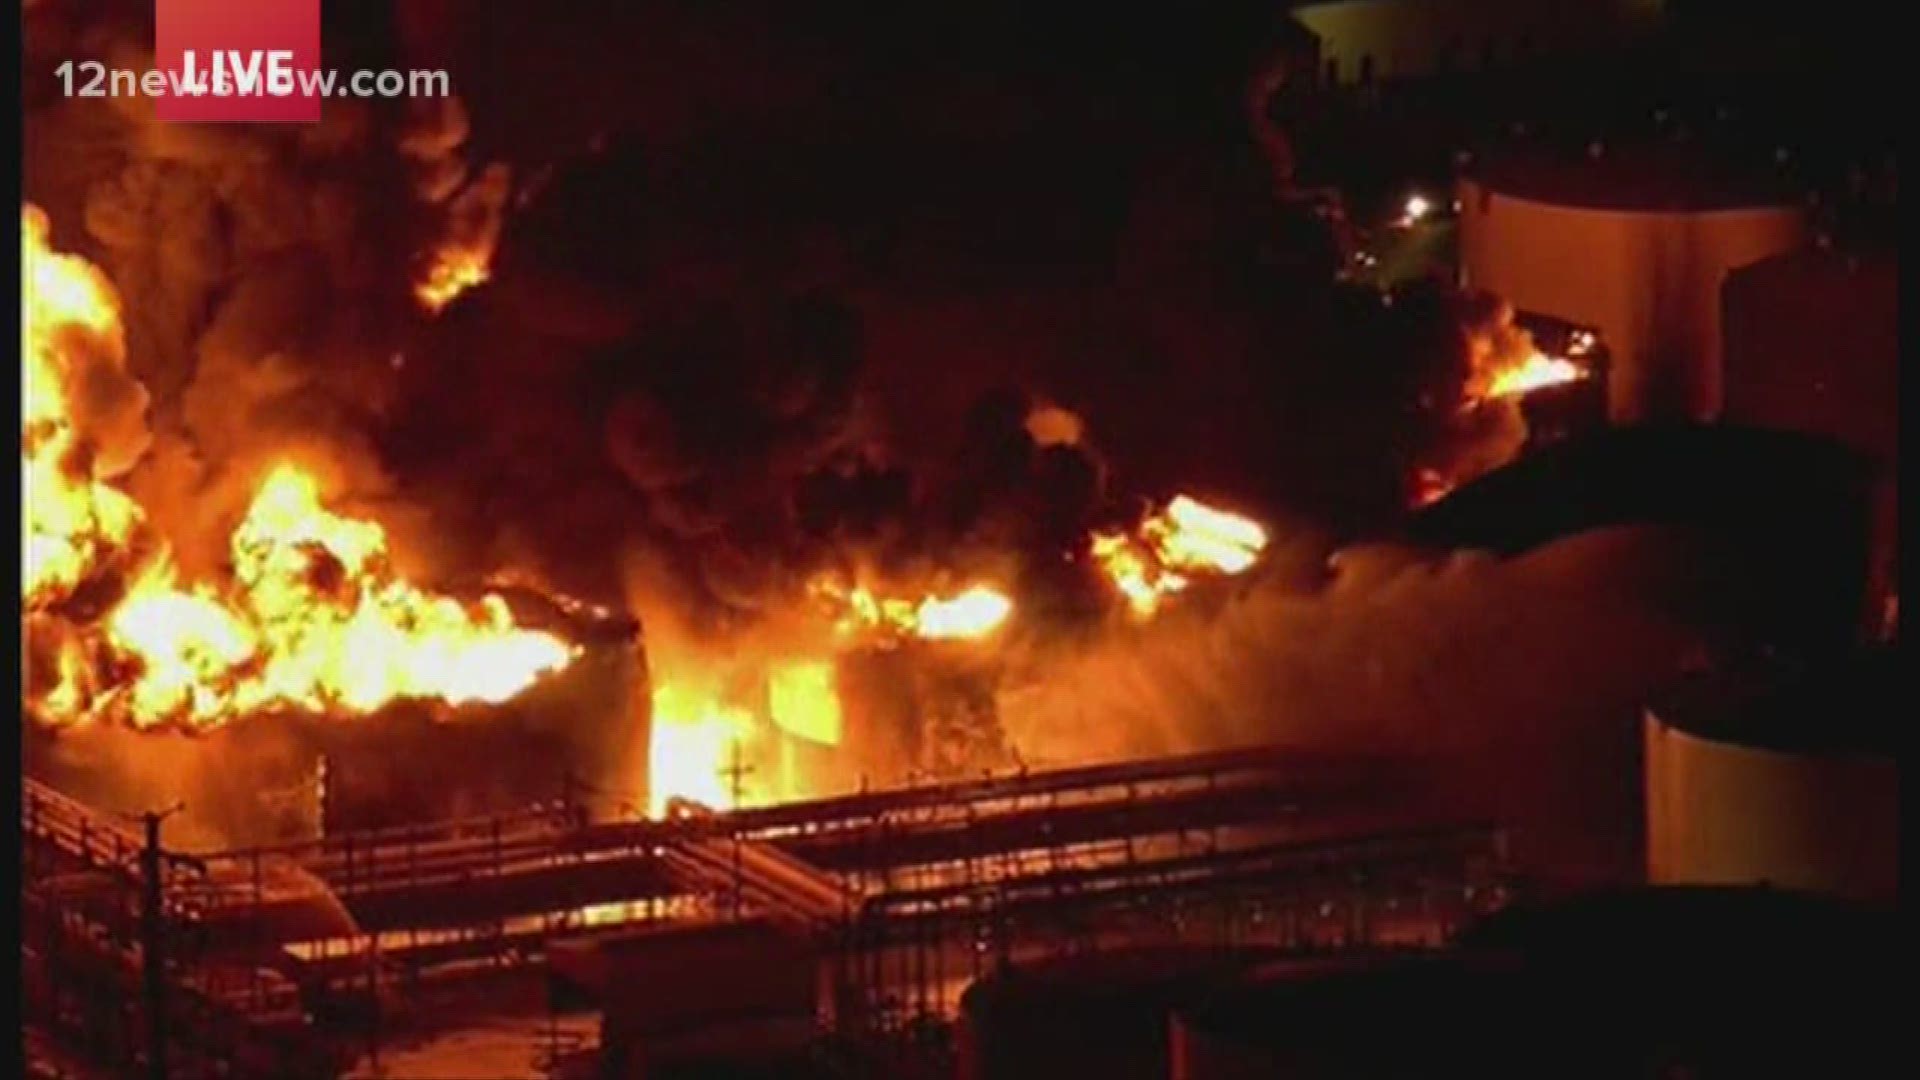 Officials say the tanks will continue to burn for at another day.